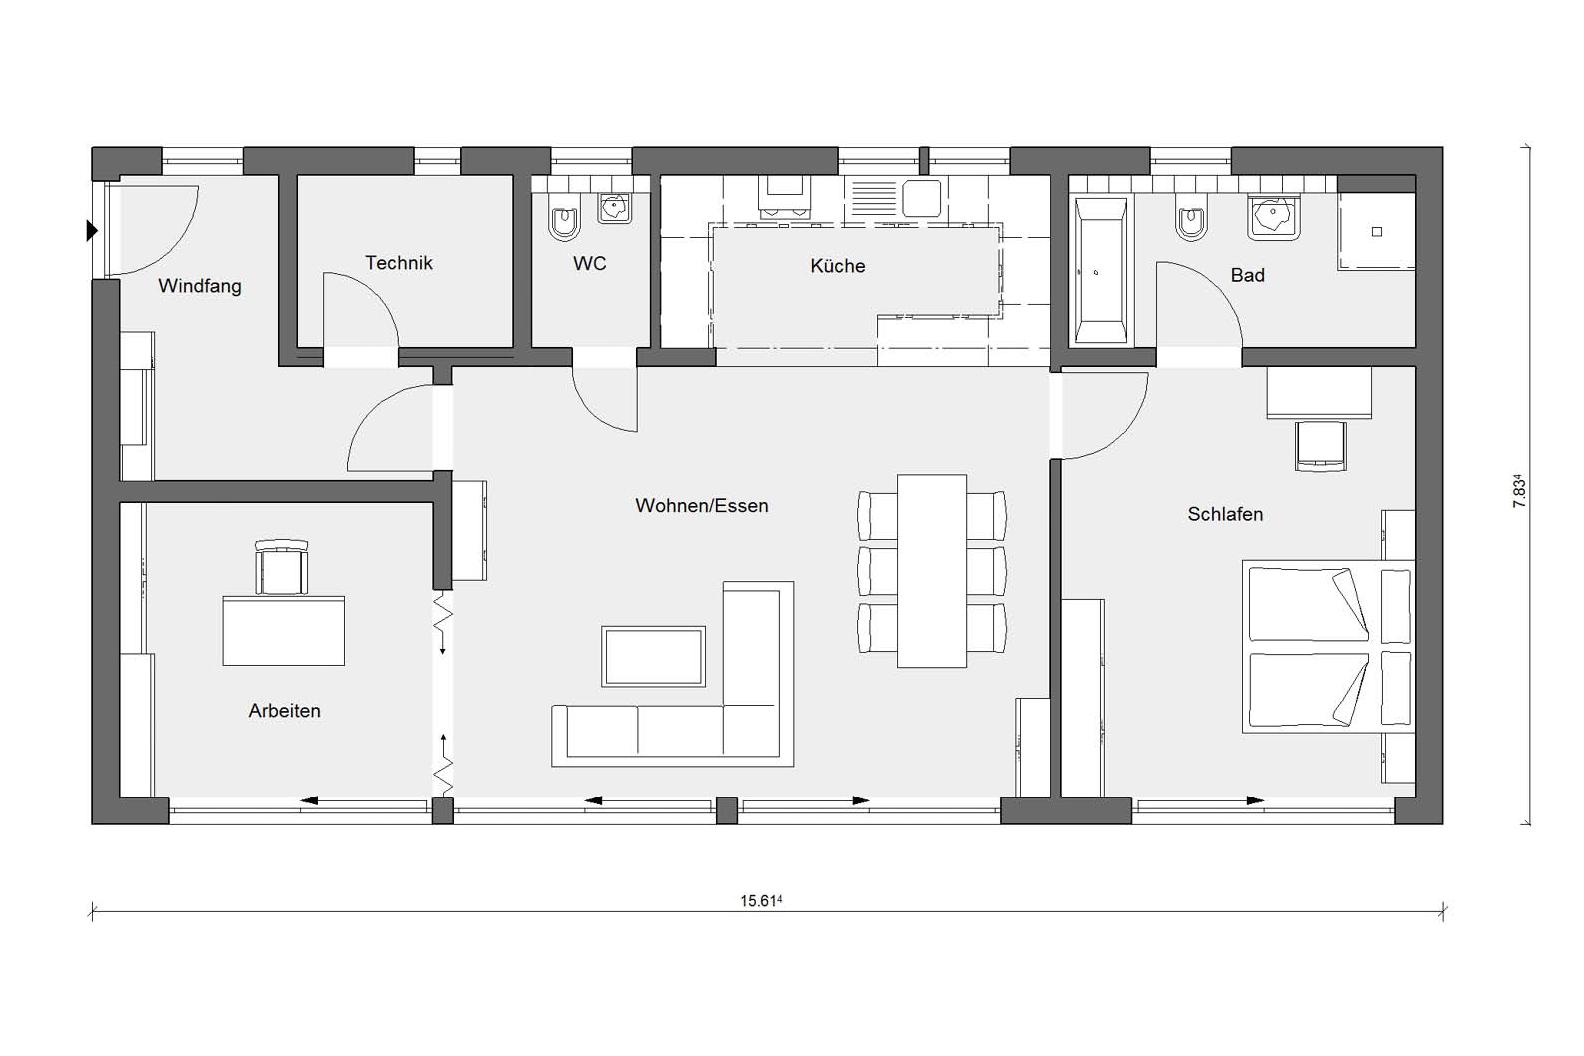 Ground floor plan E 10-102.4 Bungalow with flat roof